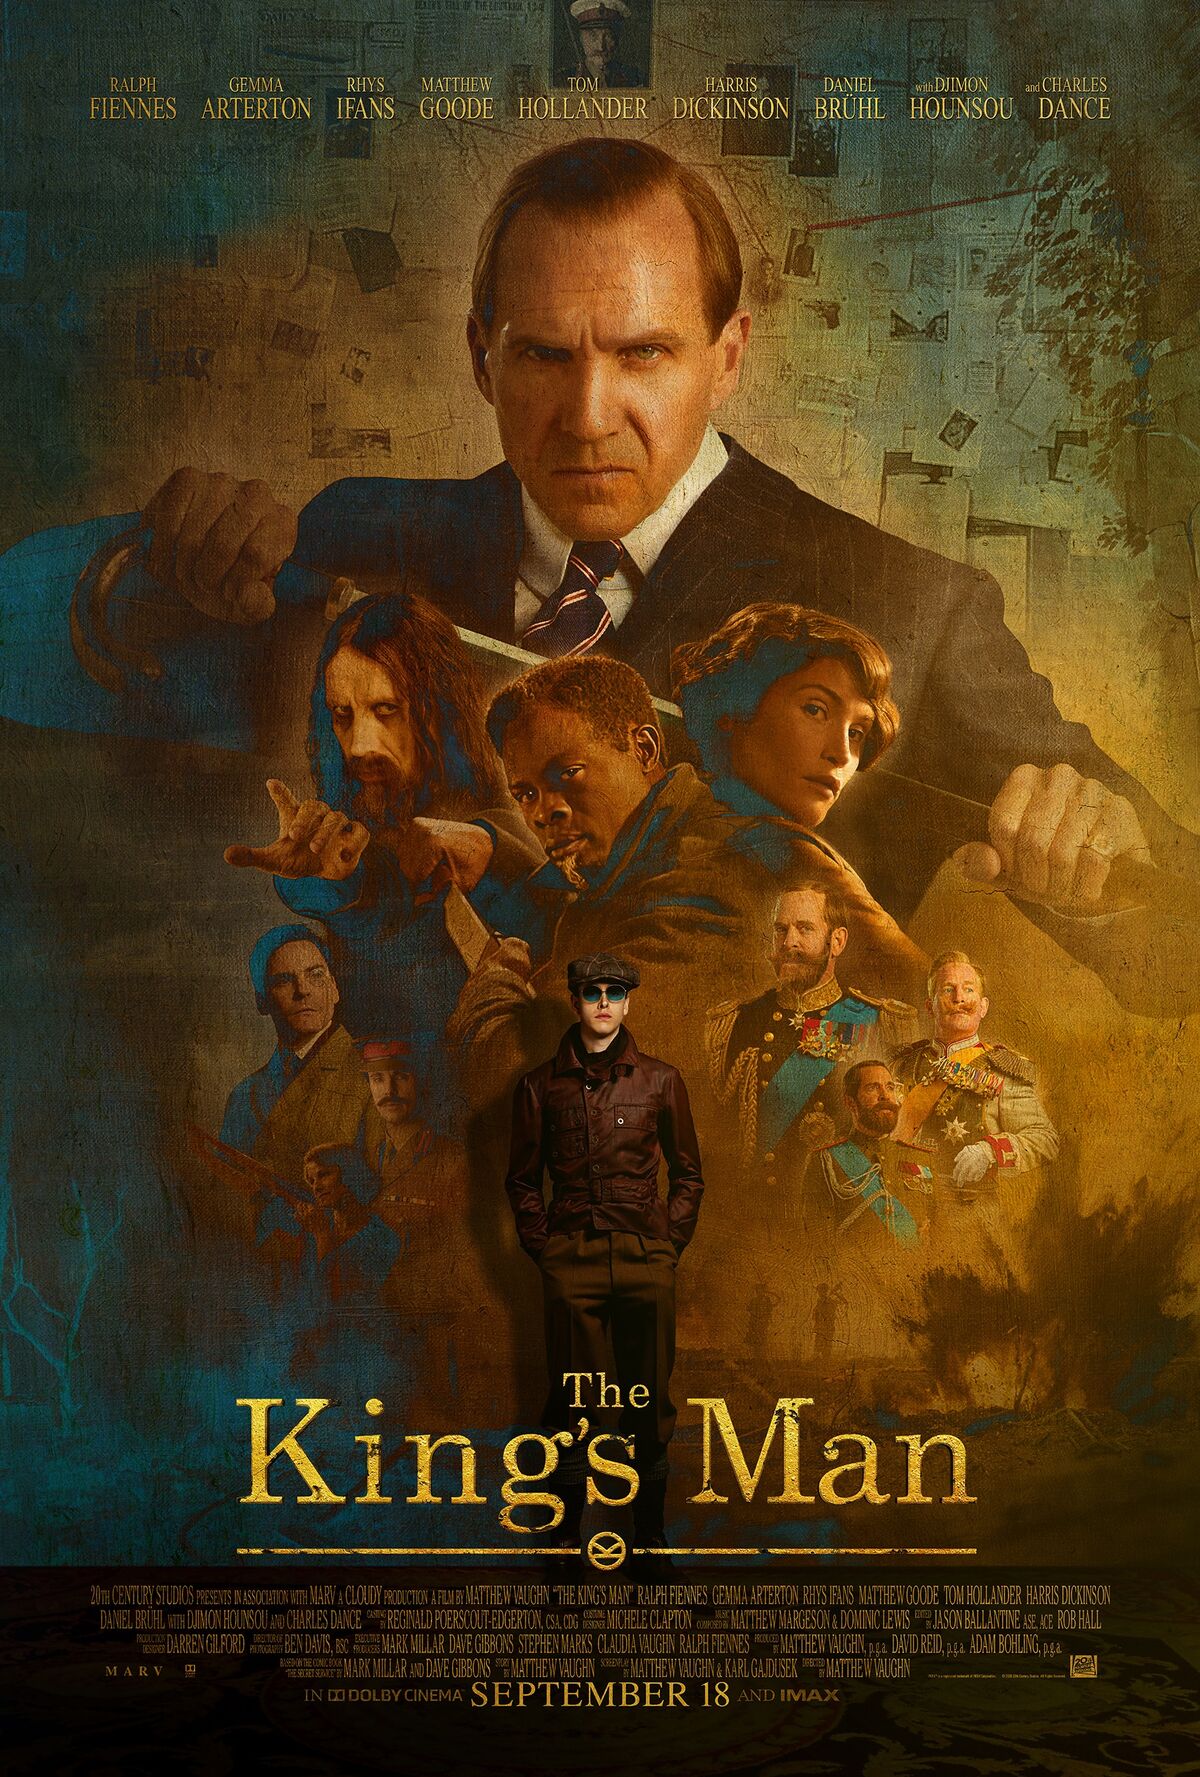 The King's Man' Tells an Origin Story No One Asked For